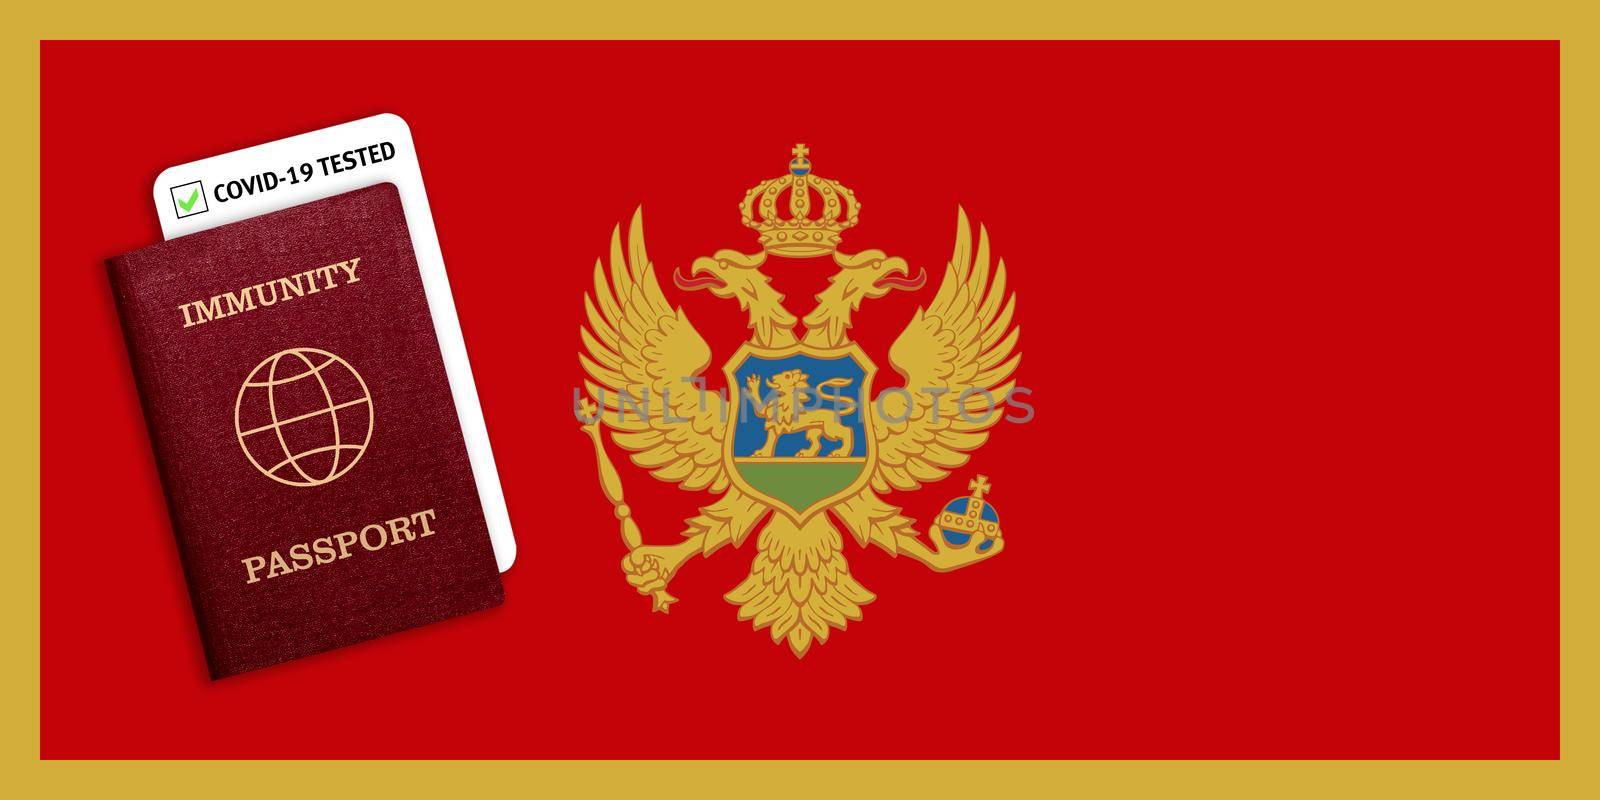 Concept of Immunity passport, certificate for traveling after pandemic for people who have had coronavirus or made vaccine and test result for COVID-19 on flag of Montenegro